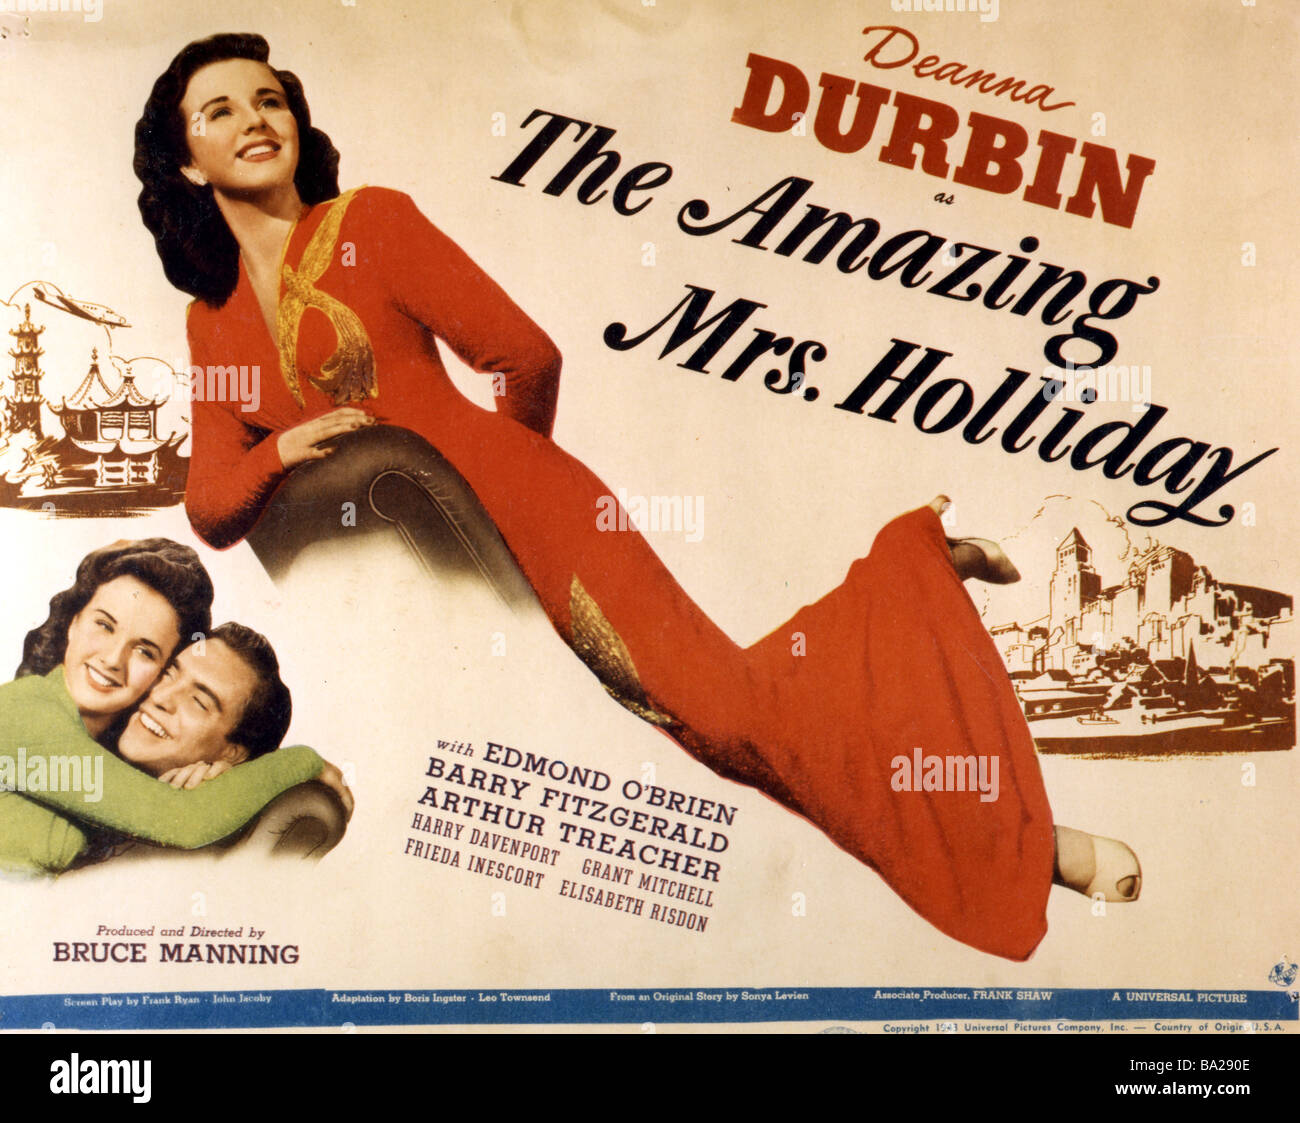 THE AMAZING MRS HOLLIDAY   Poster for 1943 Universal film with  Deanna Durbin Stock Photo